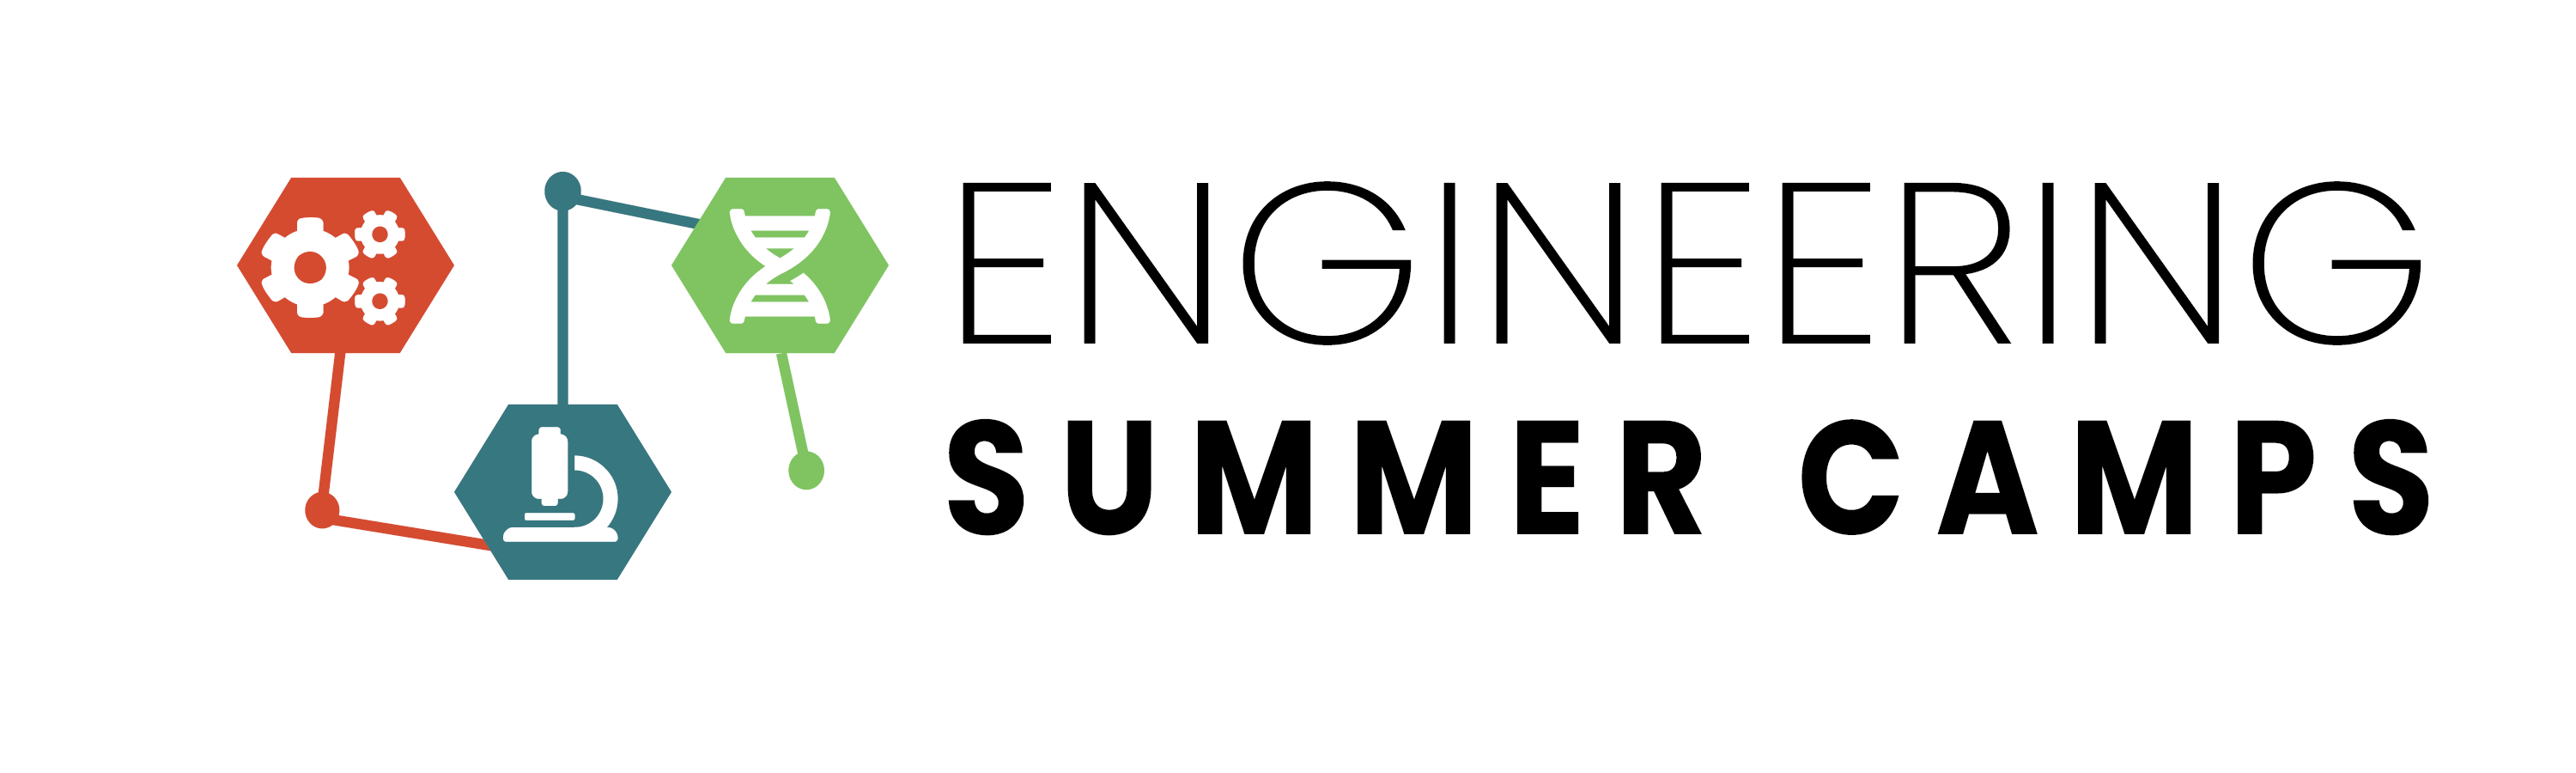 Engineering Summer Camps